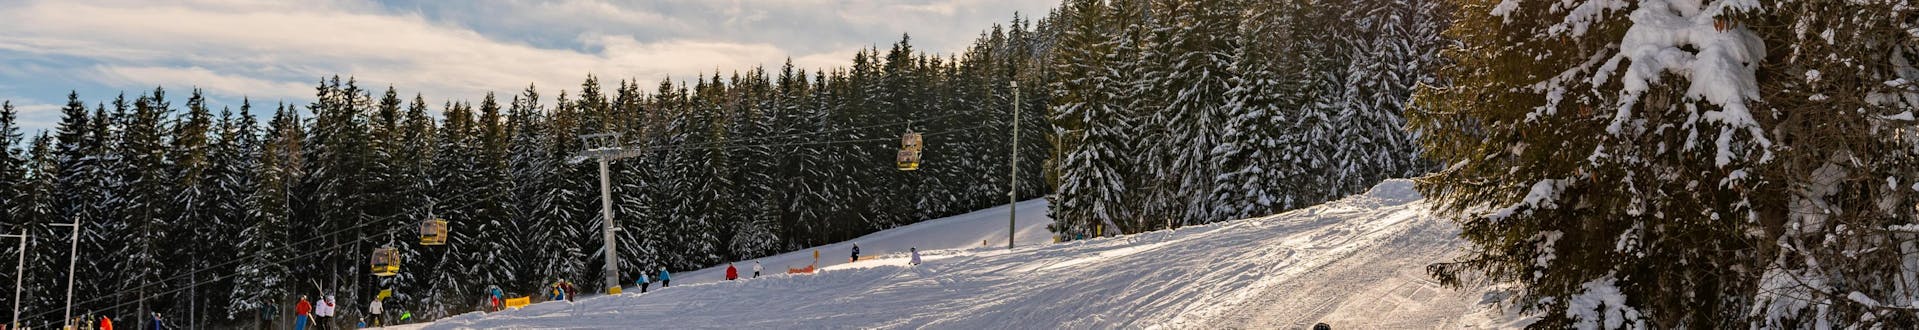 View of the pistes and a chairlift in the ski resort Schladming - Planai, where local ski schools offer their ski lessons.